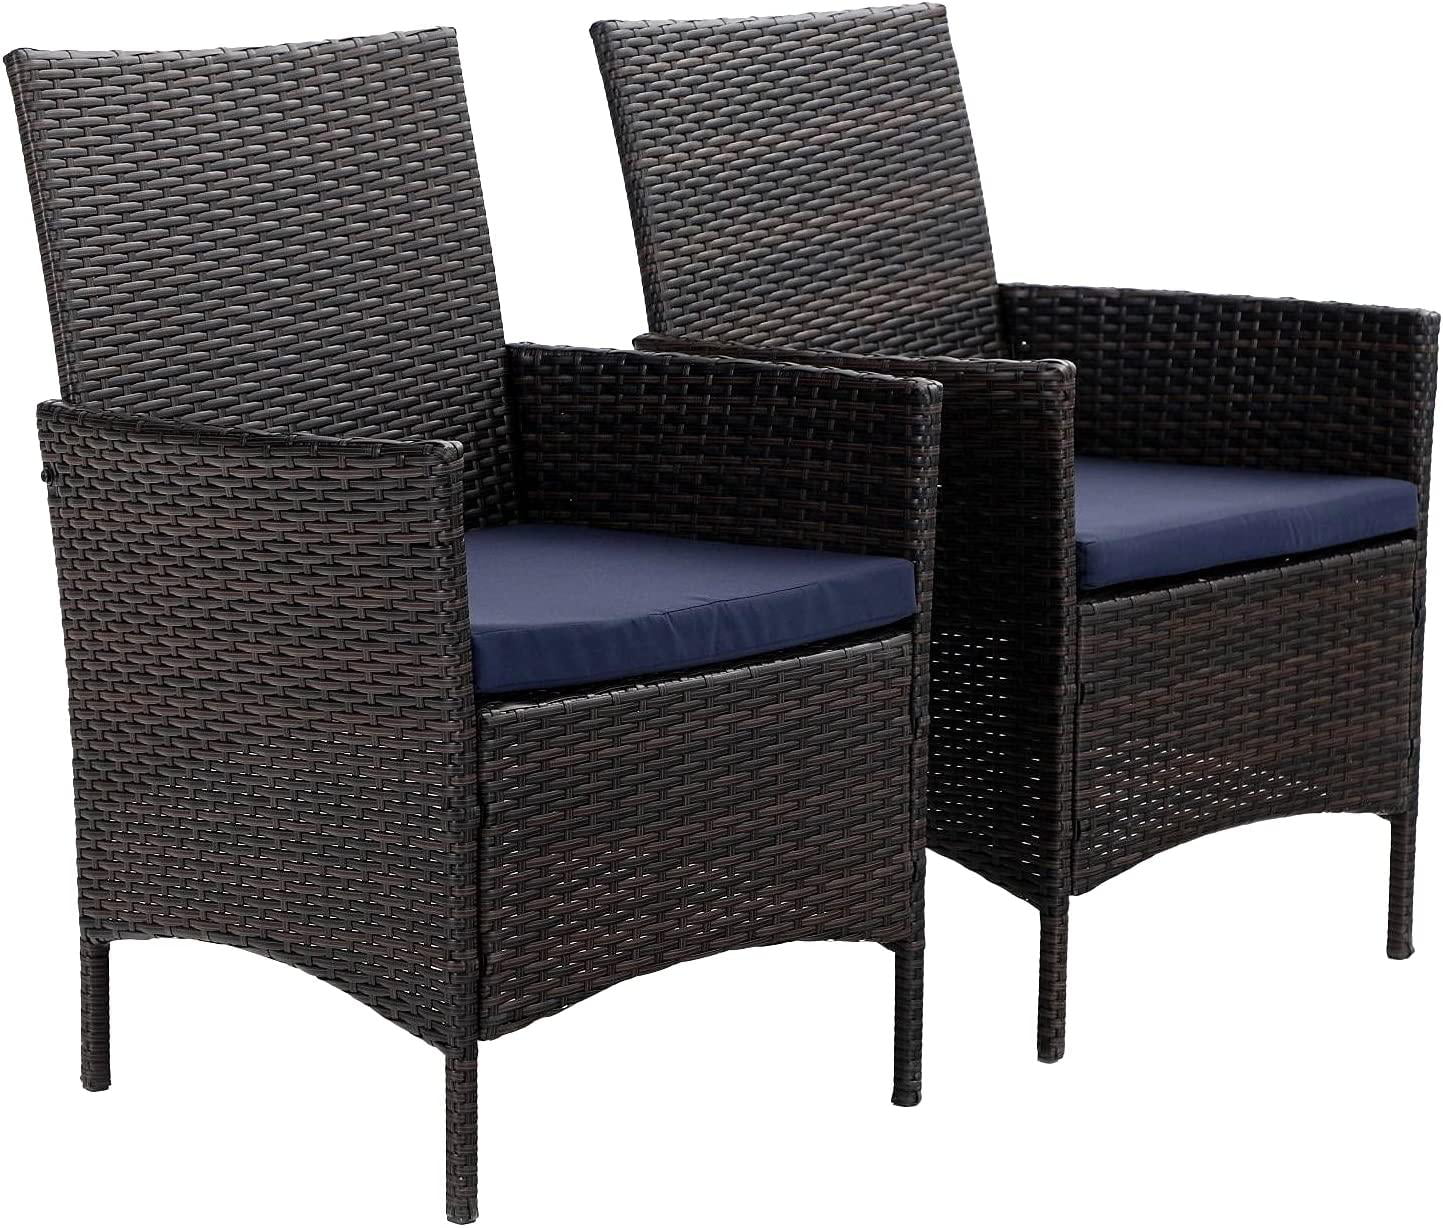 Sophia & William 7 Piece Outdoor Patio Dining Set Outdoor Furniture Set with 6 Rattan Dining Chairs and 1 Metal Expandable Dining Table